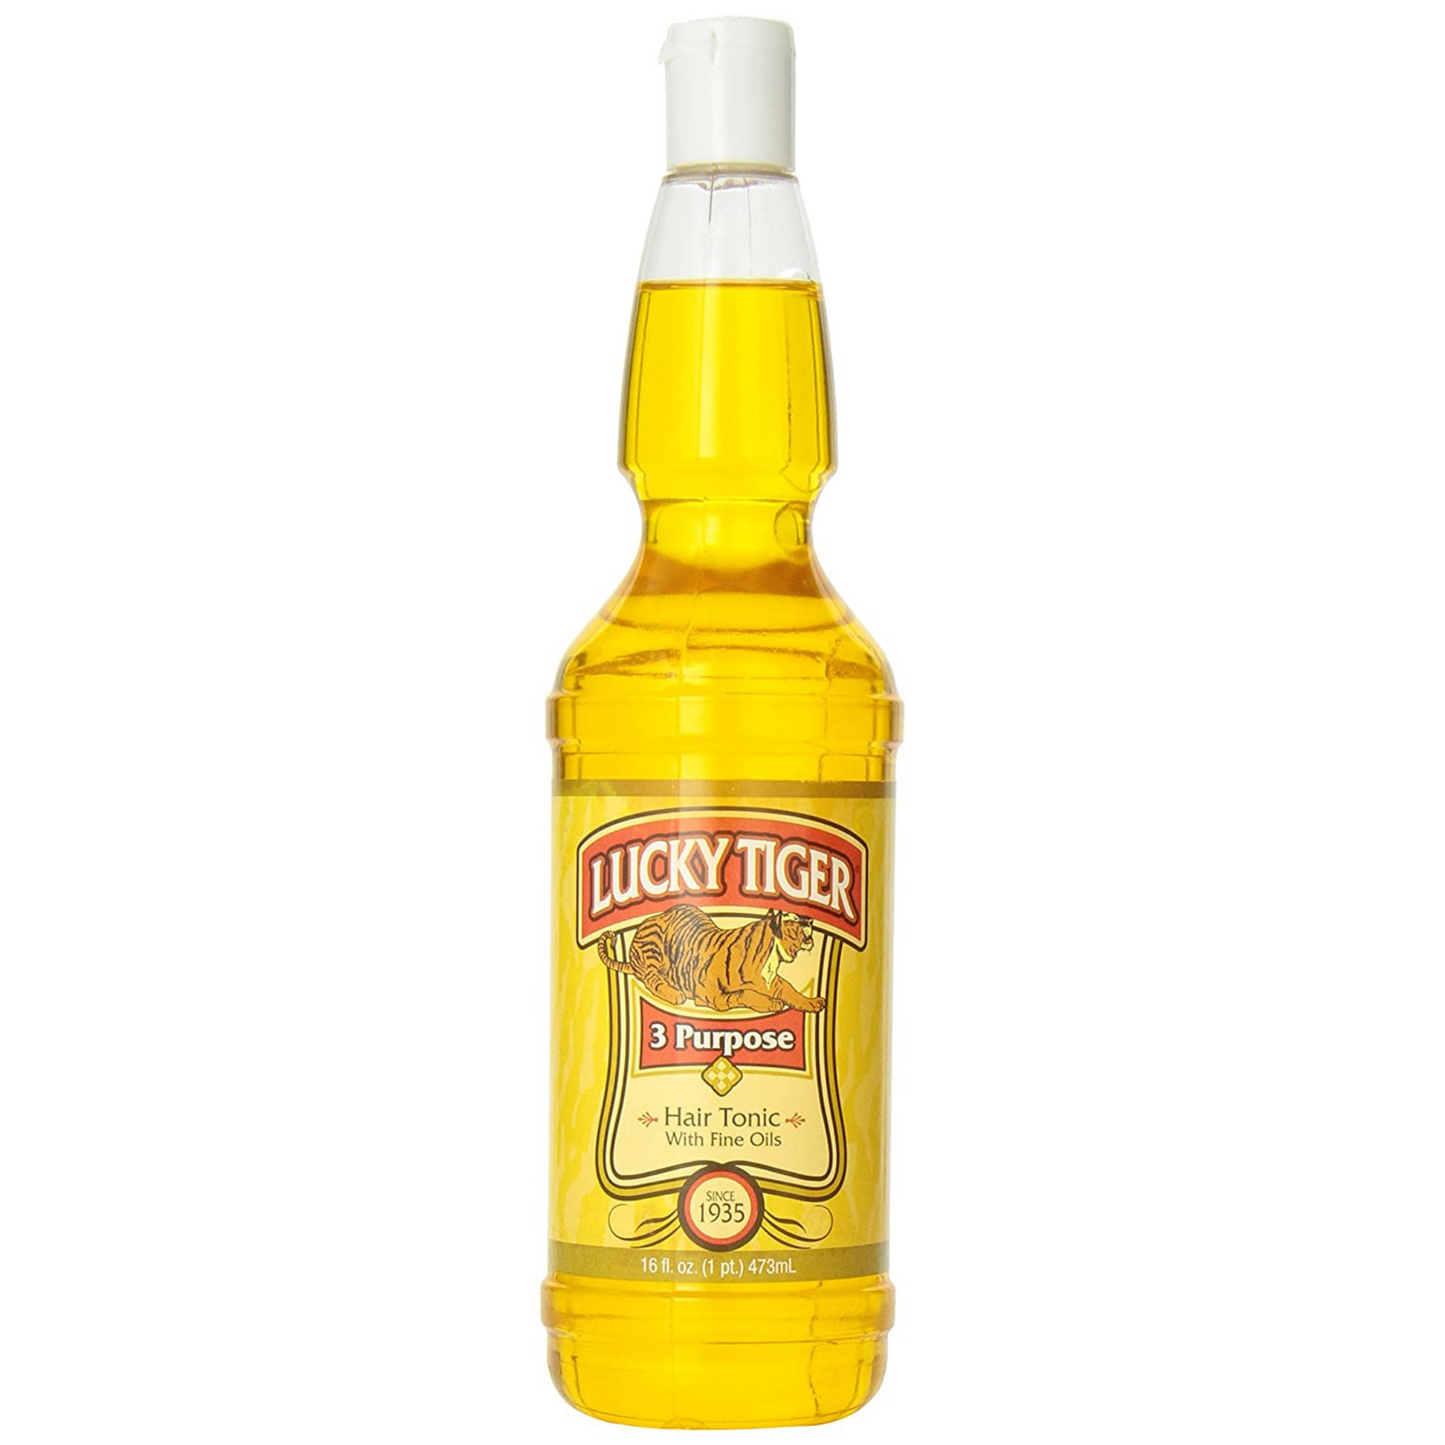 Primary Image of Lucky Tiger 3 Purpose Hair Tonic (16 fl oz)